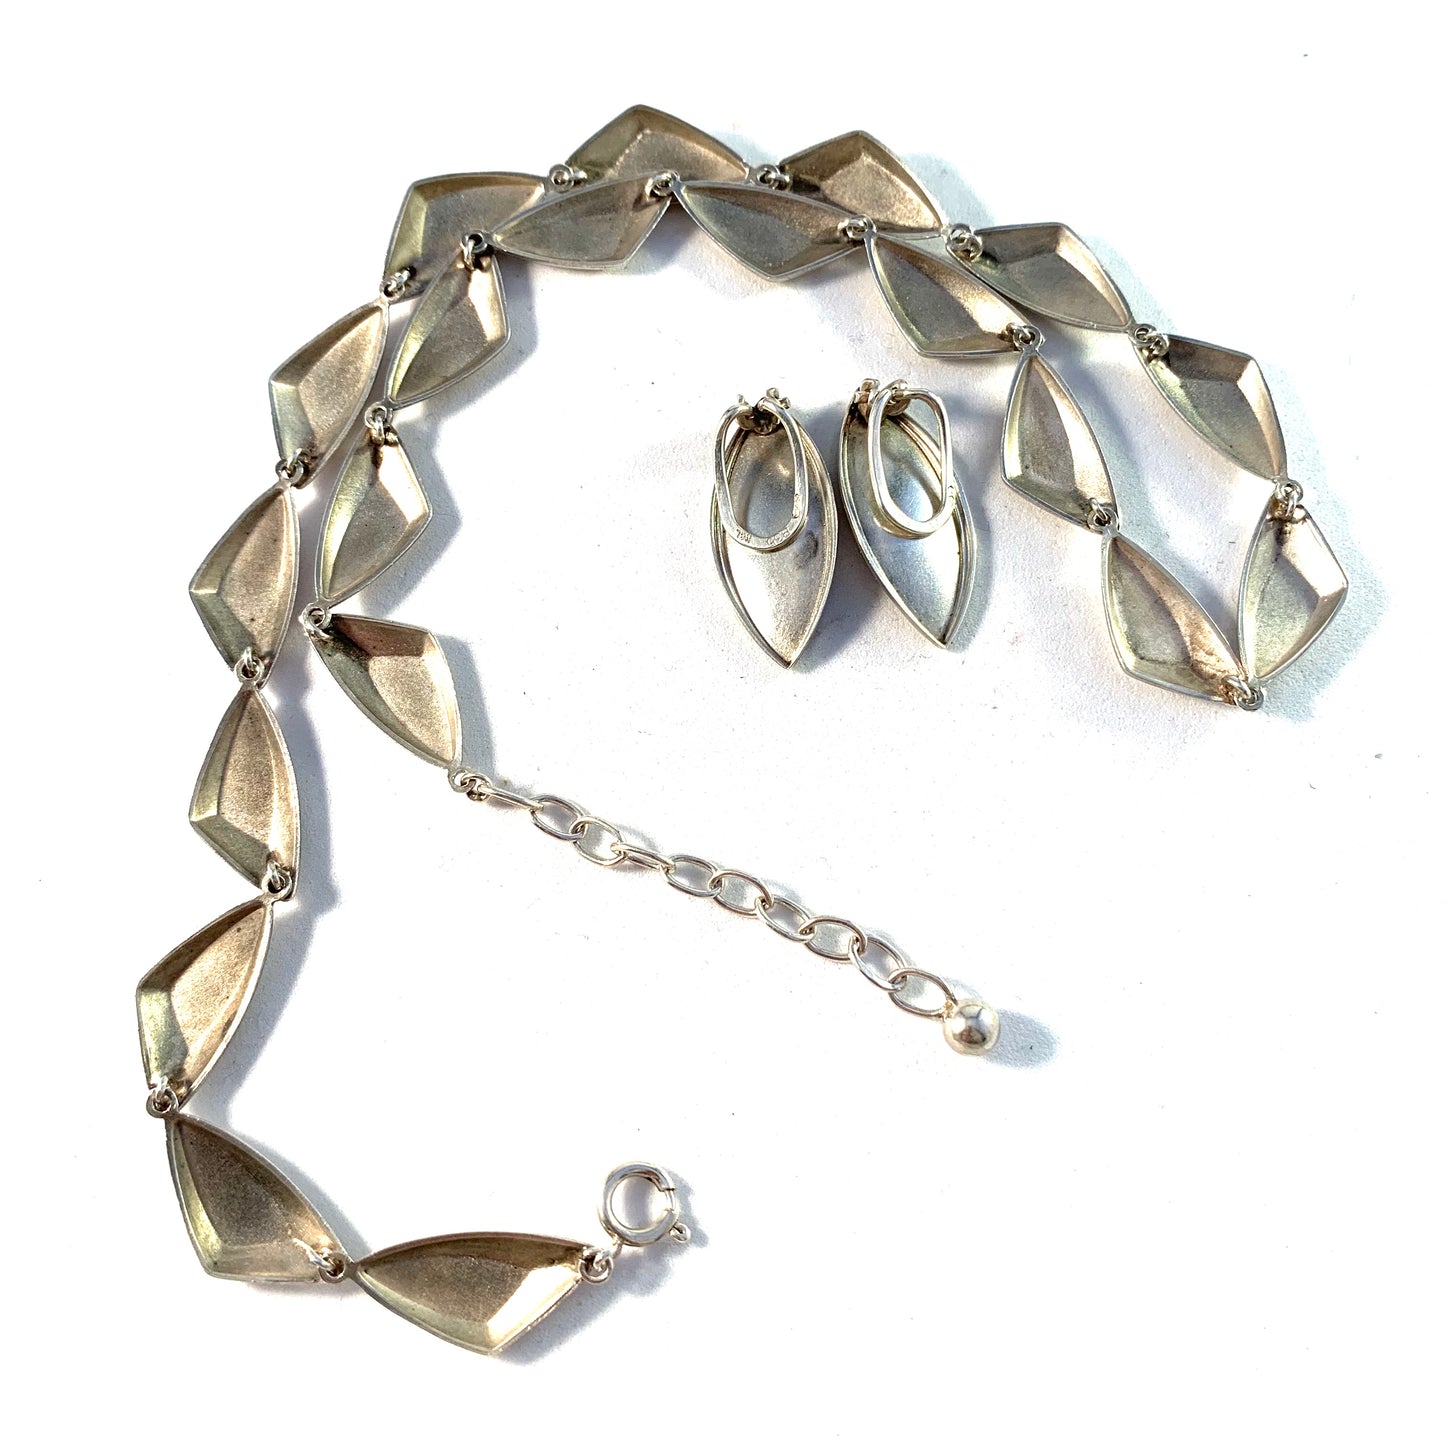 K&L-Kordes Lichtenfels, Germany 1950-60s Solid 835 Silver Necklace and Earrings.